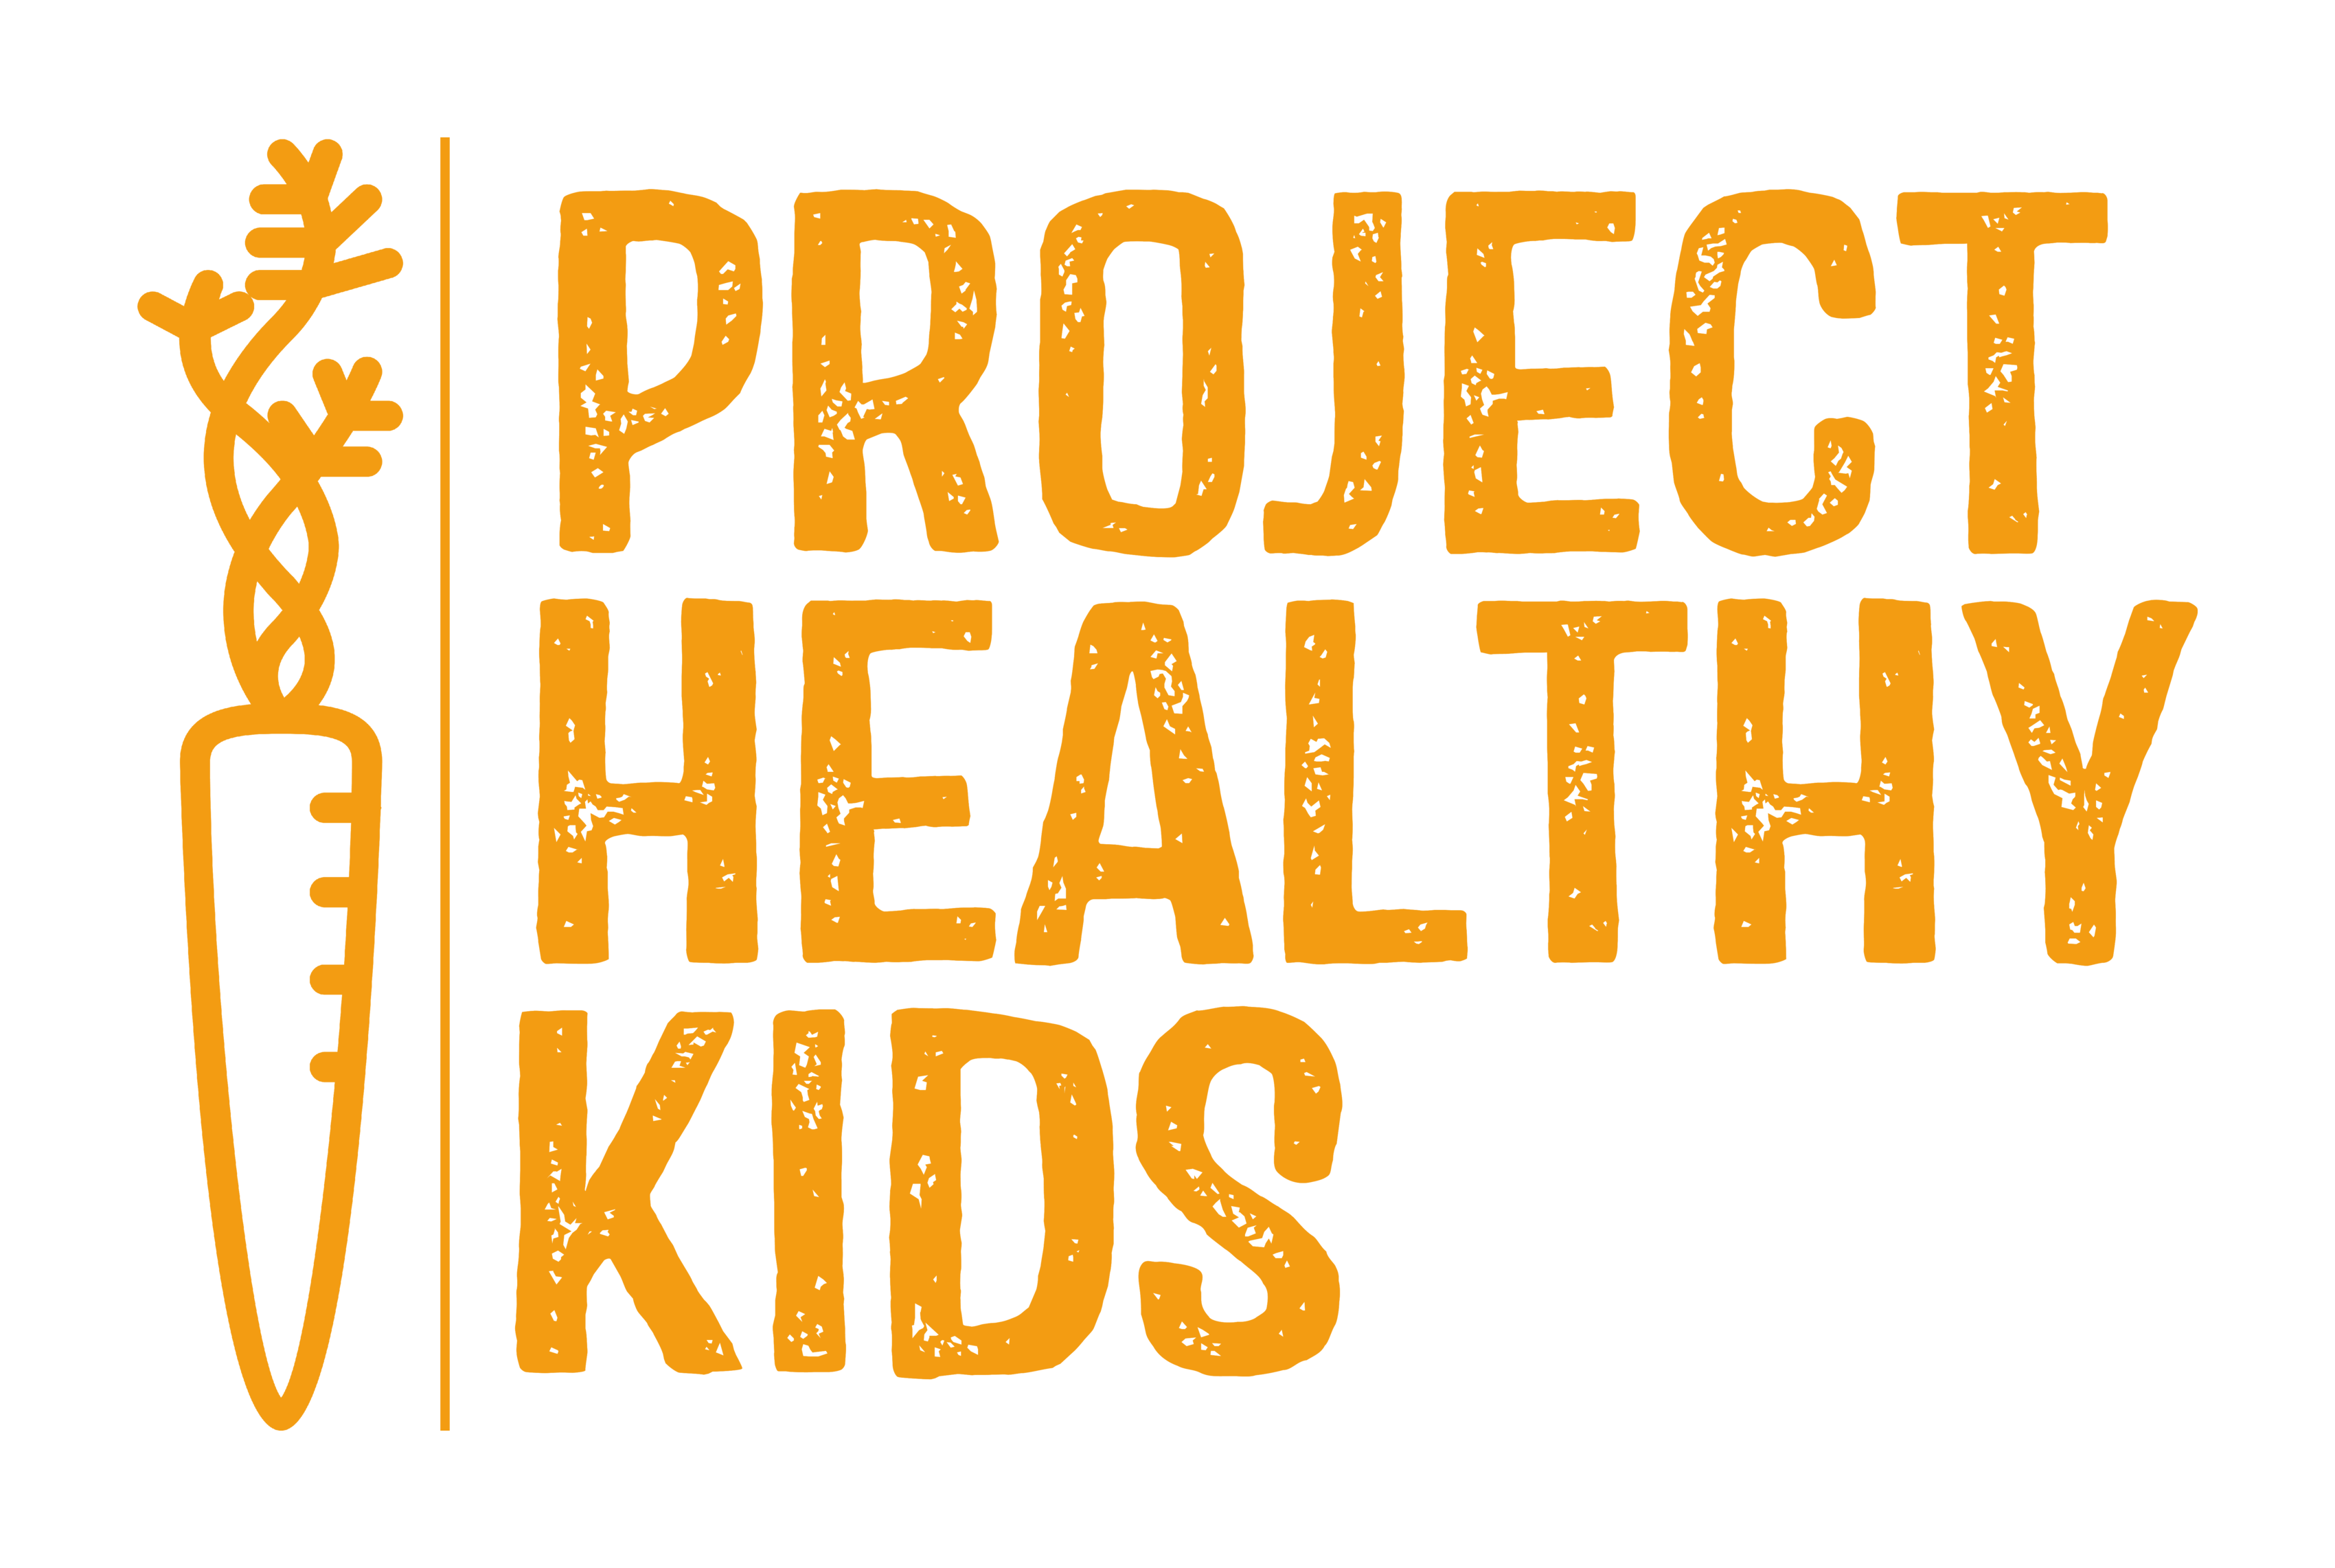 Project Healthy Kids